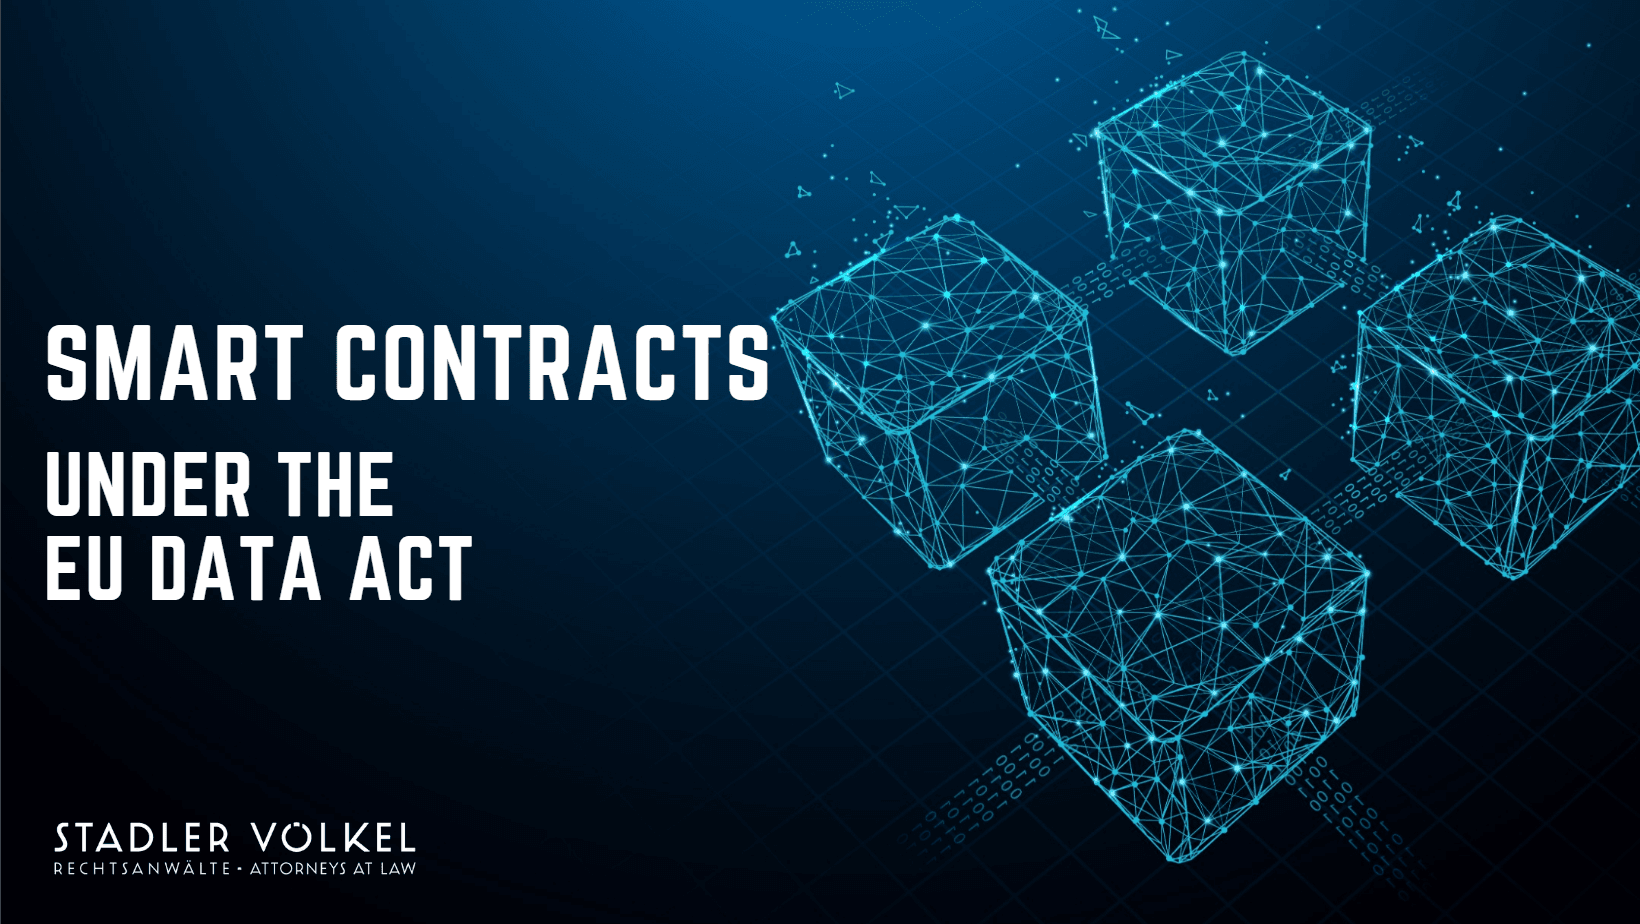 Smart Contracts under the EU Data Act